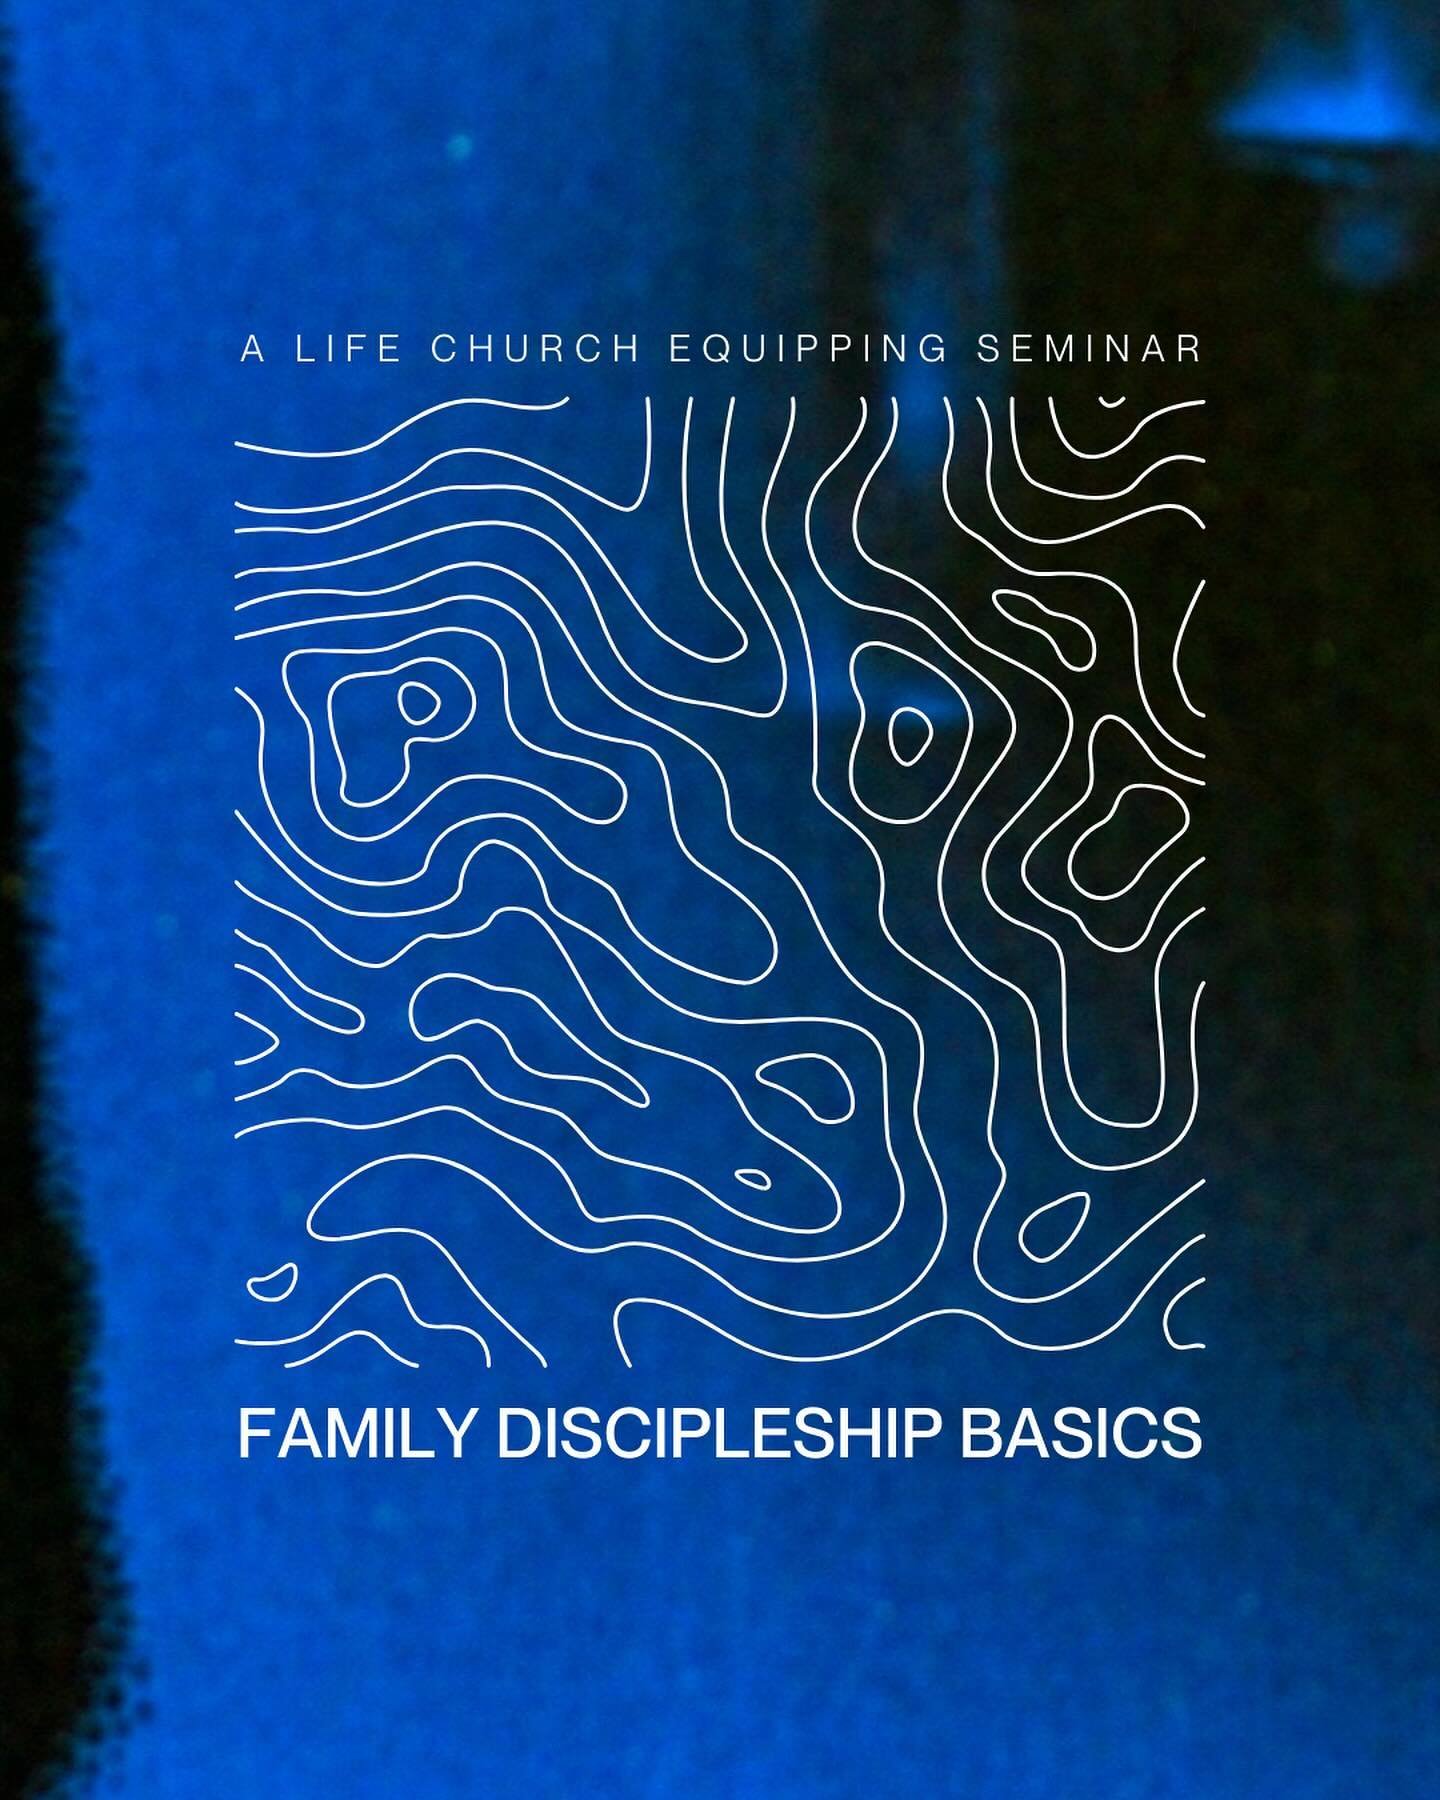 In light of the response to our first seminar, we&rsquo;ve decided to offer another edition of Family Discipleship Basics. Join us for an evening of exploring some of the basics of family discipleship from a biblical perspective alongside other famil